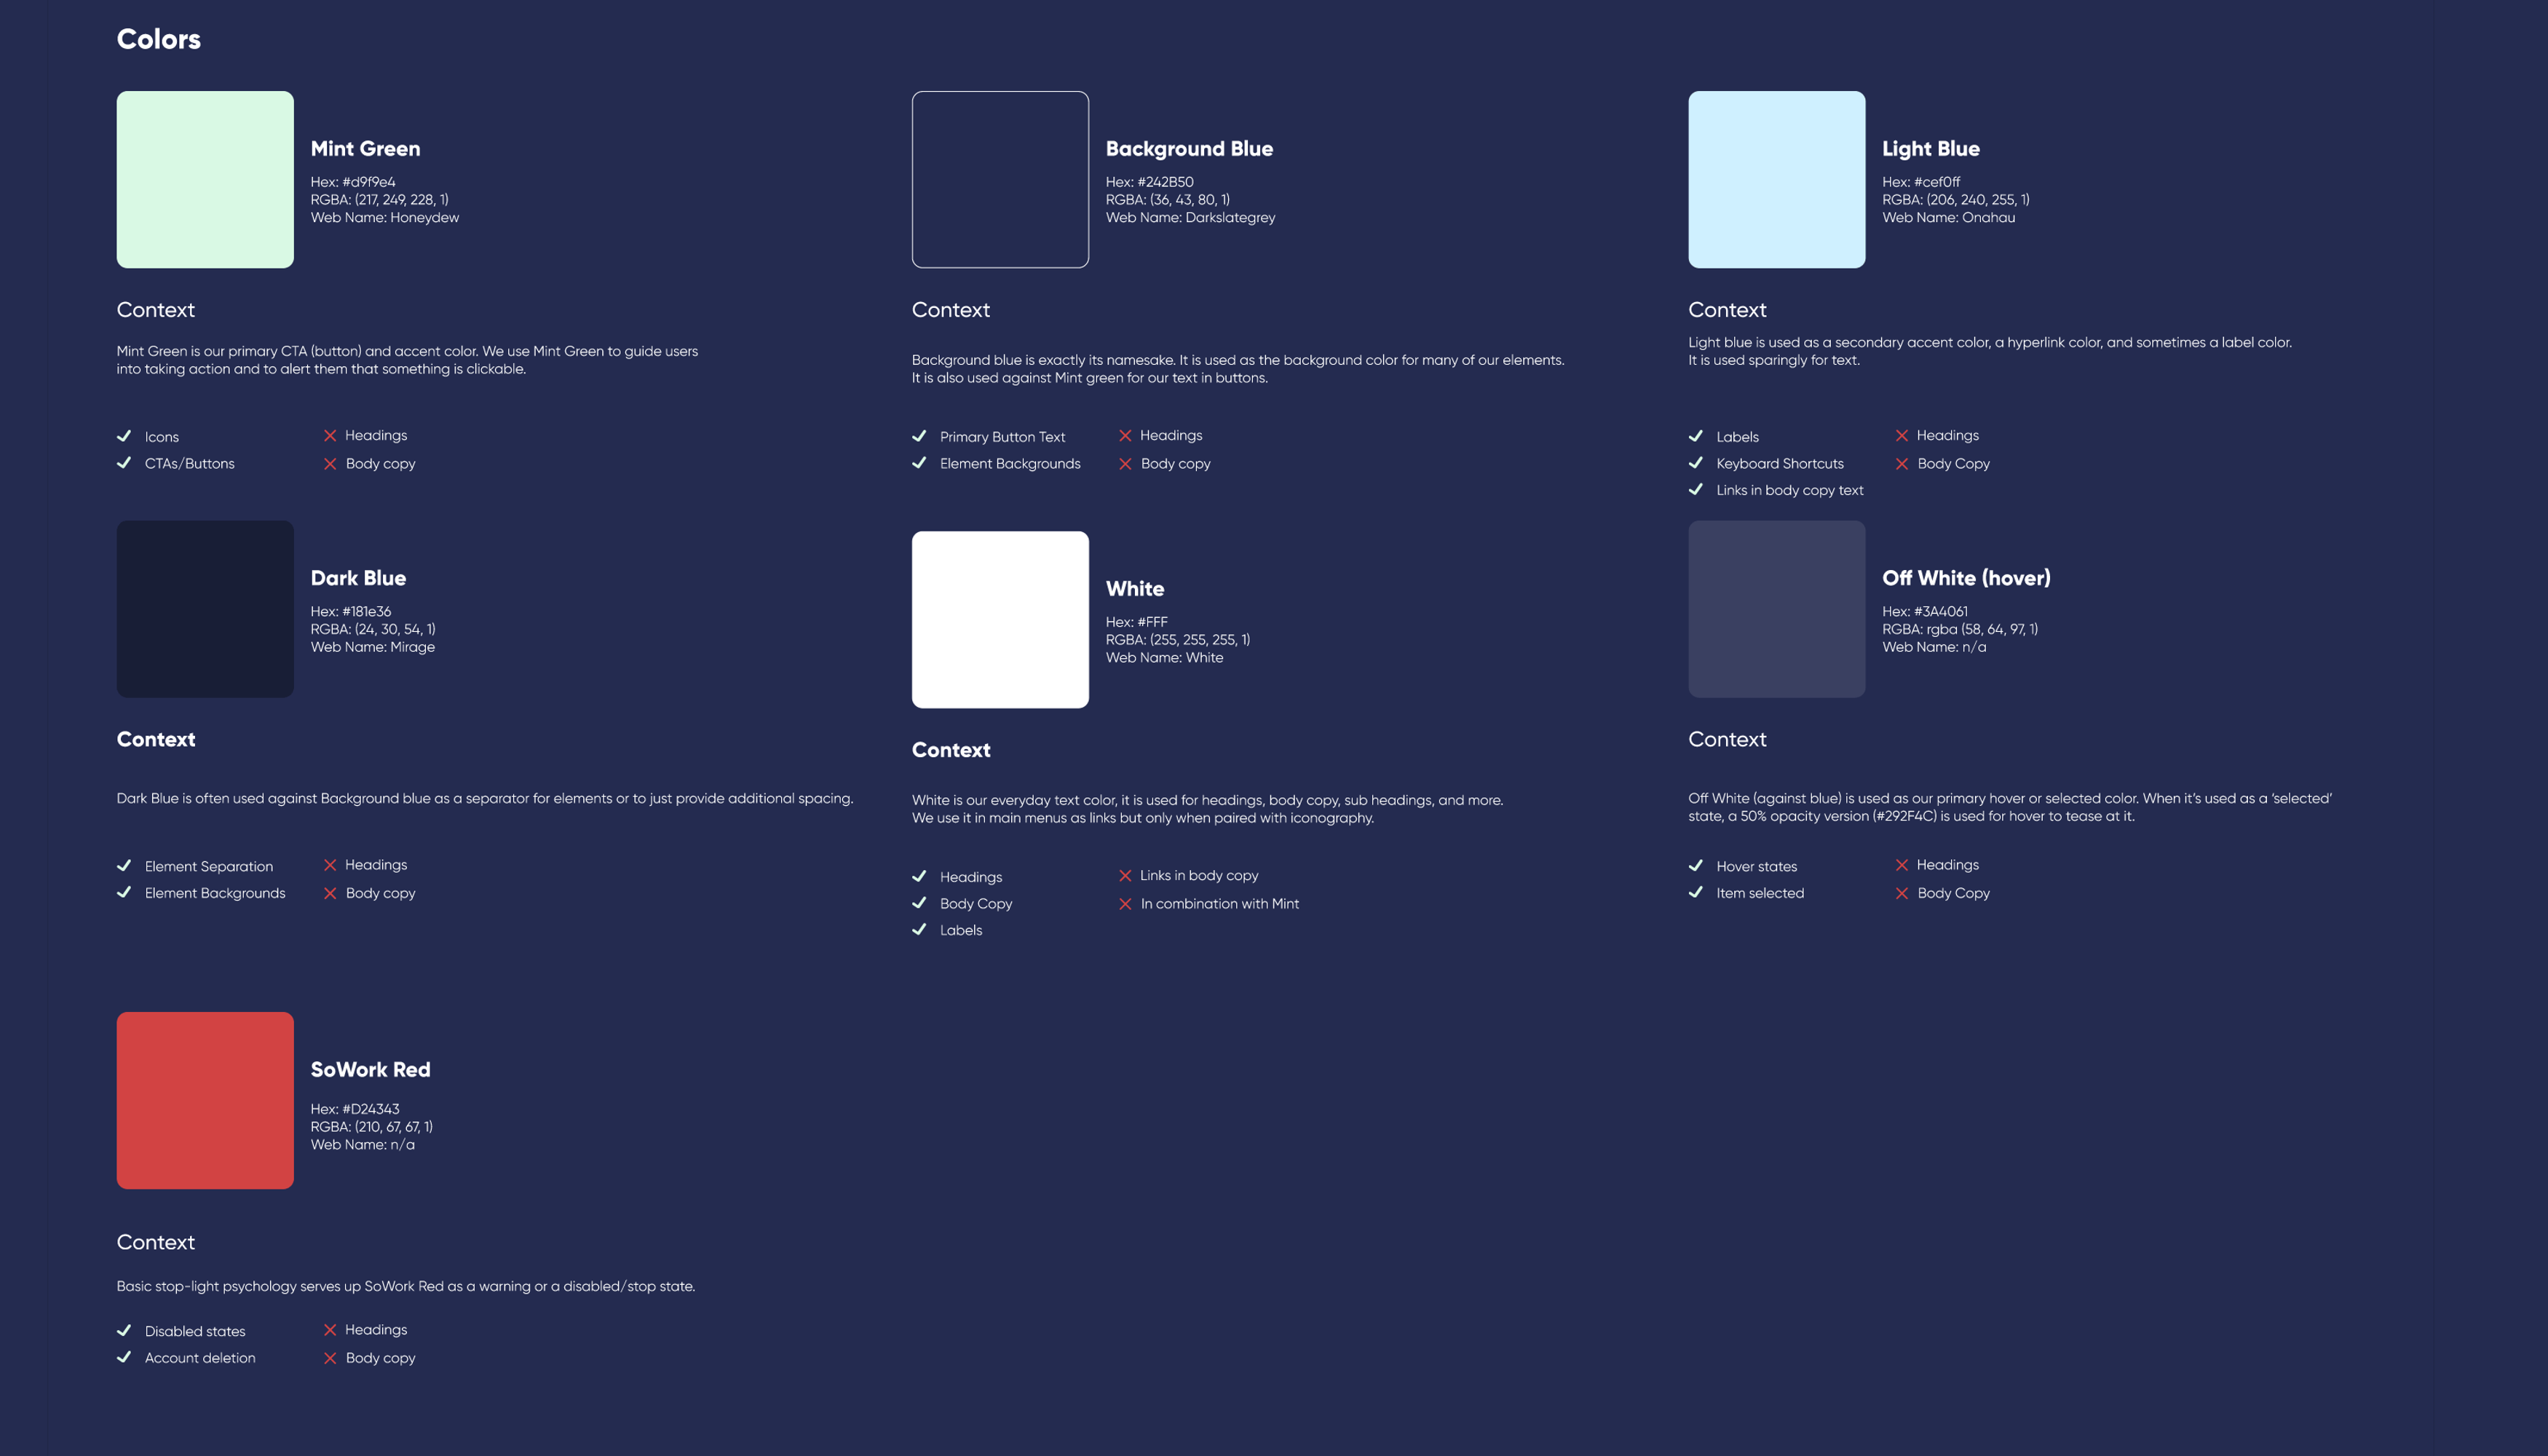 Screenshot of SoWork's colors in the Figma Style Guide